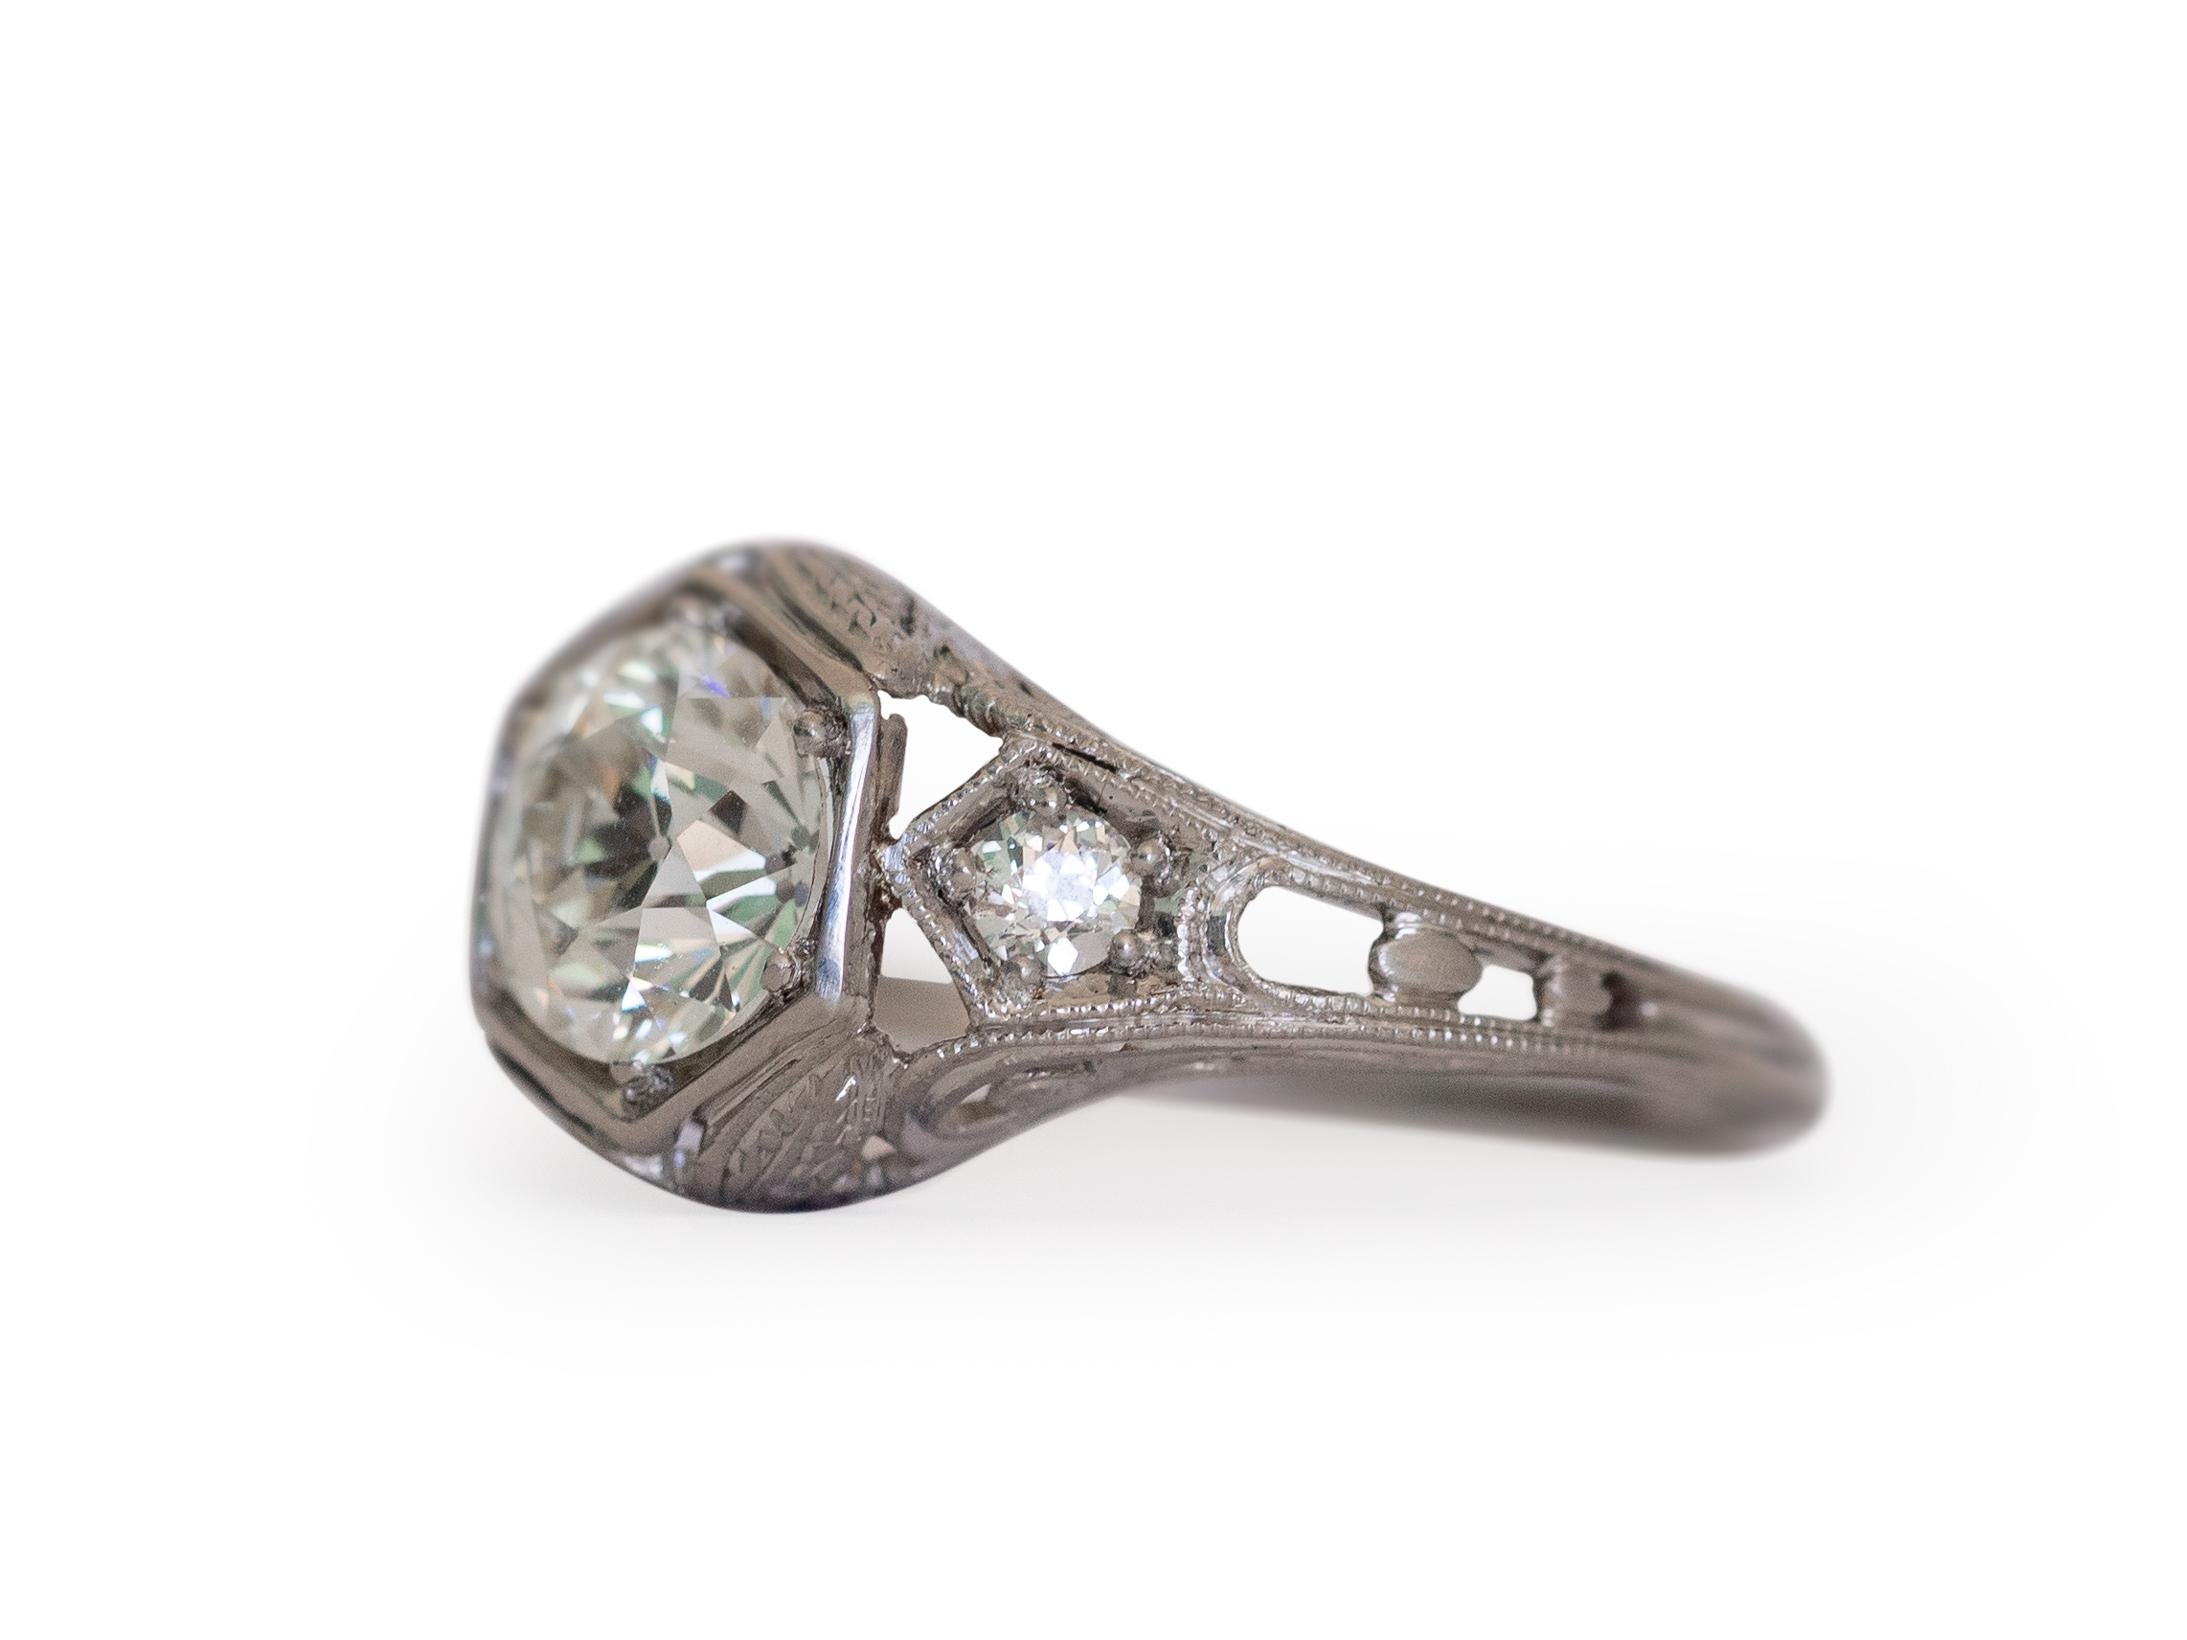 Ring Size: 6.5
Metal Type: Platinum  [Hallmarked, and Tested]
Weight:  3.5 grams

Center Diamond Details:
GIA REPORT #: 2211152880
Weight: 1.31 carat
Cut: Old European Brilliant
Color: M
Clarity: VVS1

Side Diamond Details:
Weight: .15 carat, total